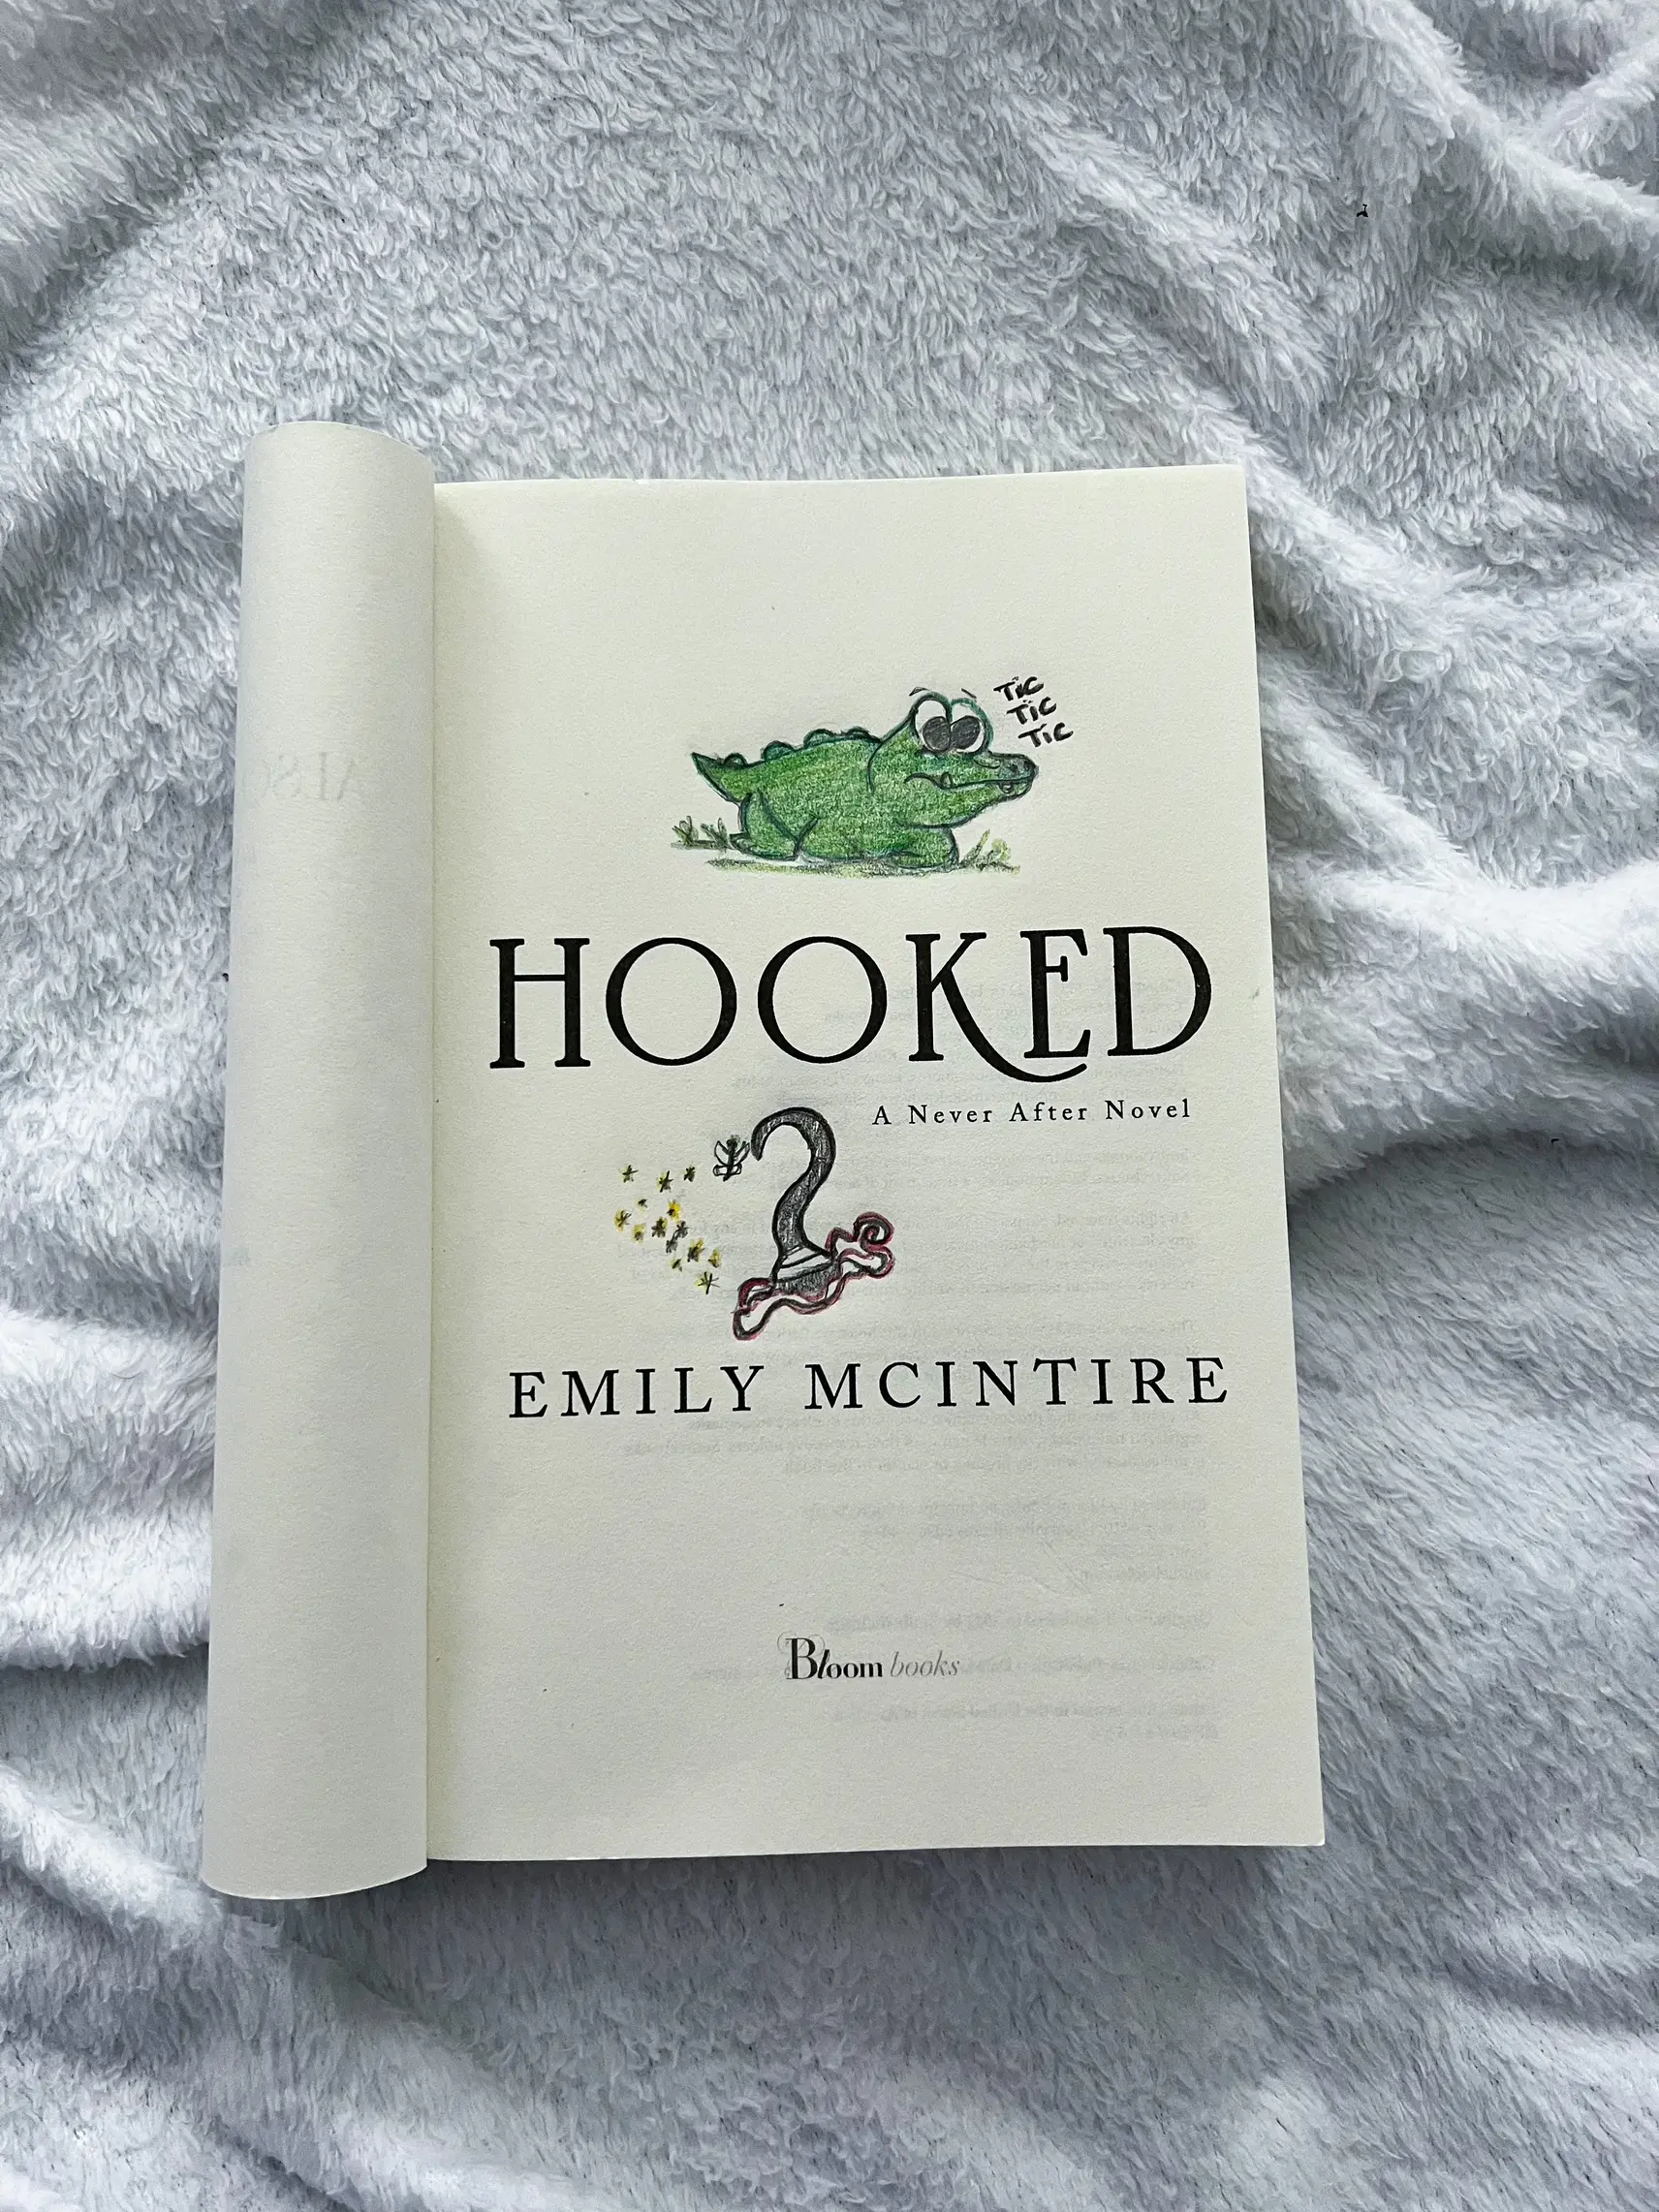 Hooked by Emily Mcintire🪝, Gallery posted by Sarah Ines